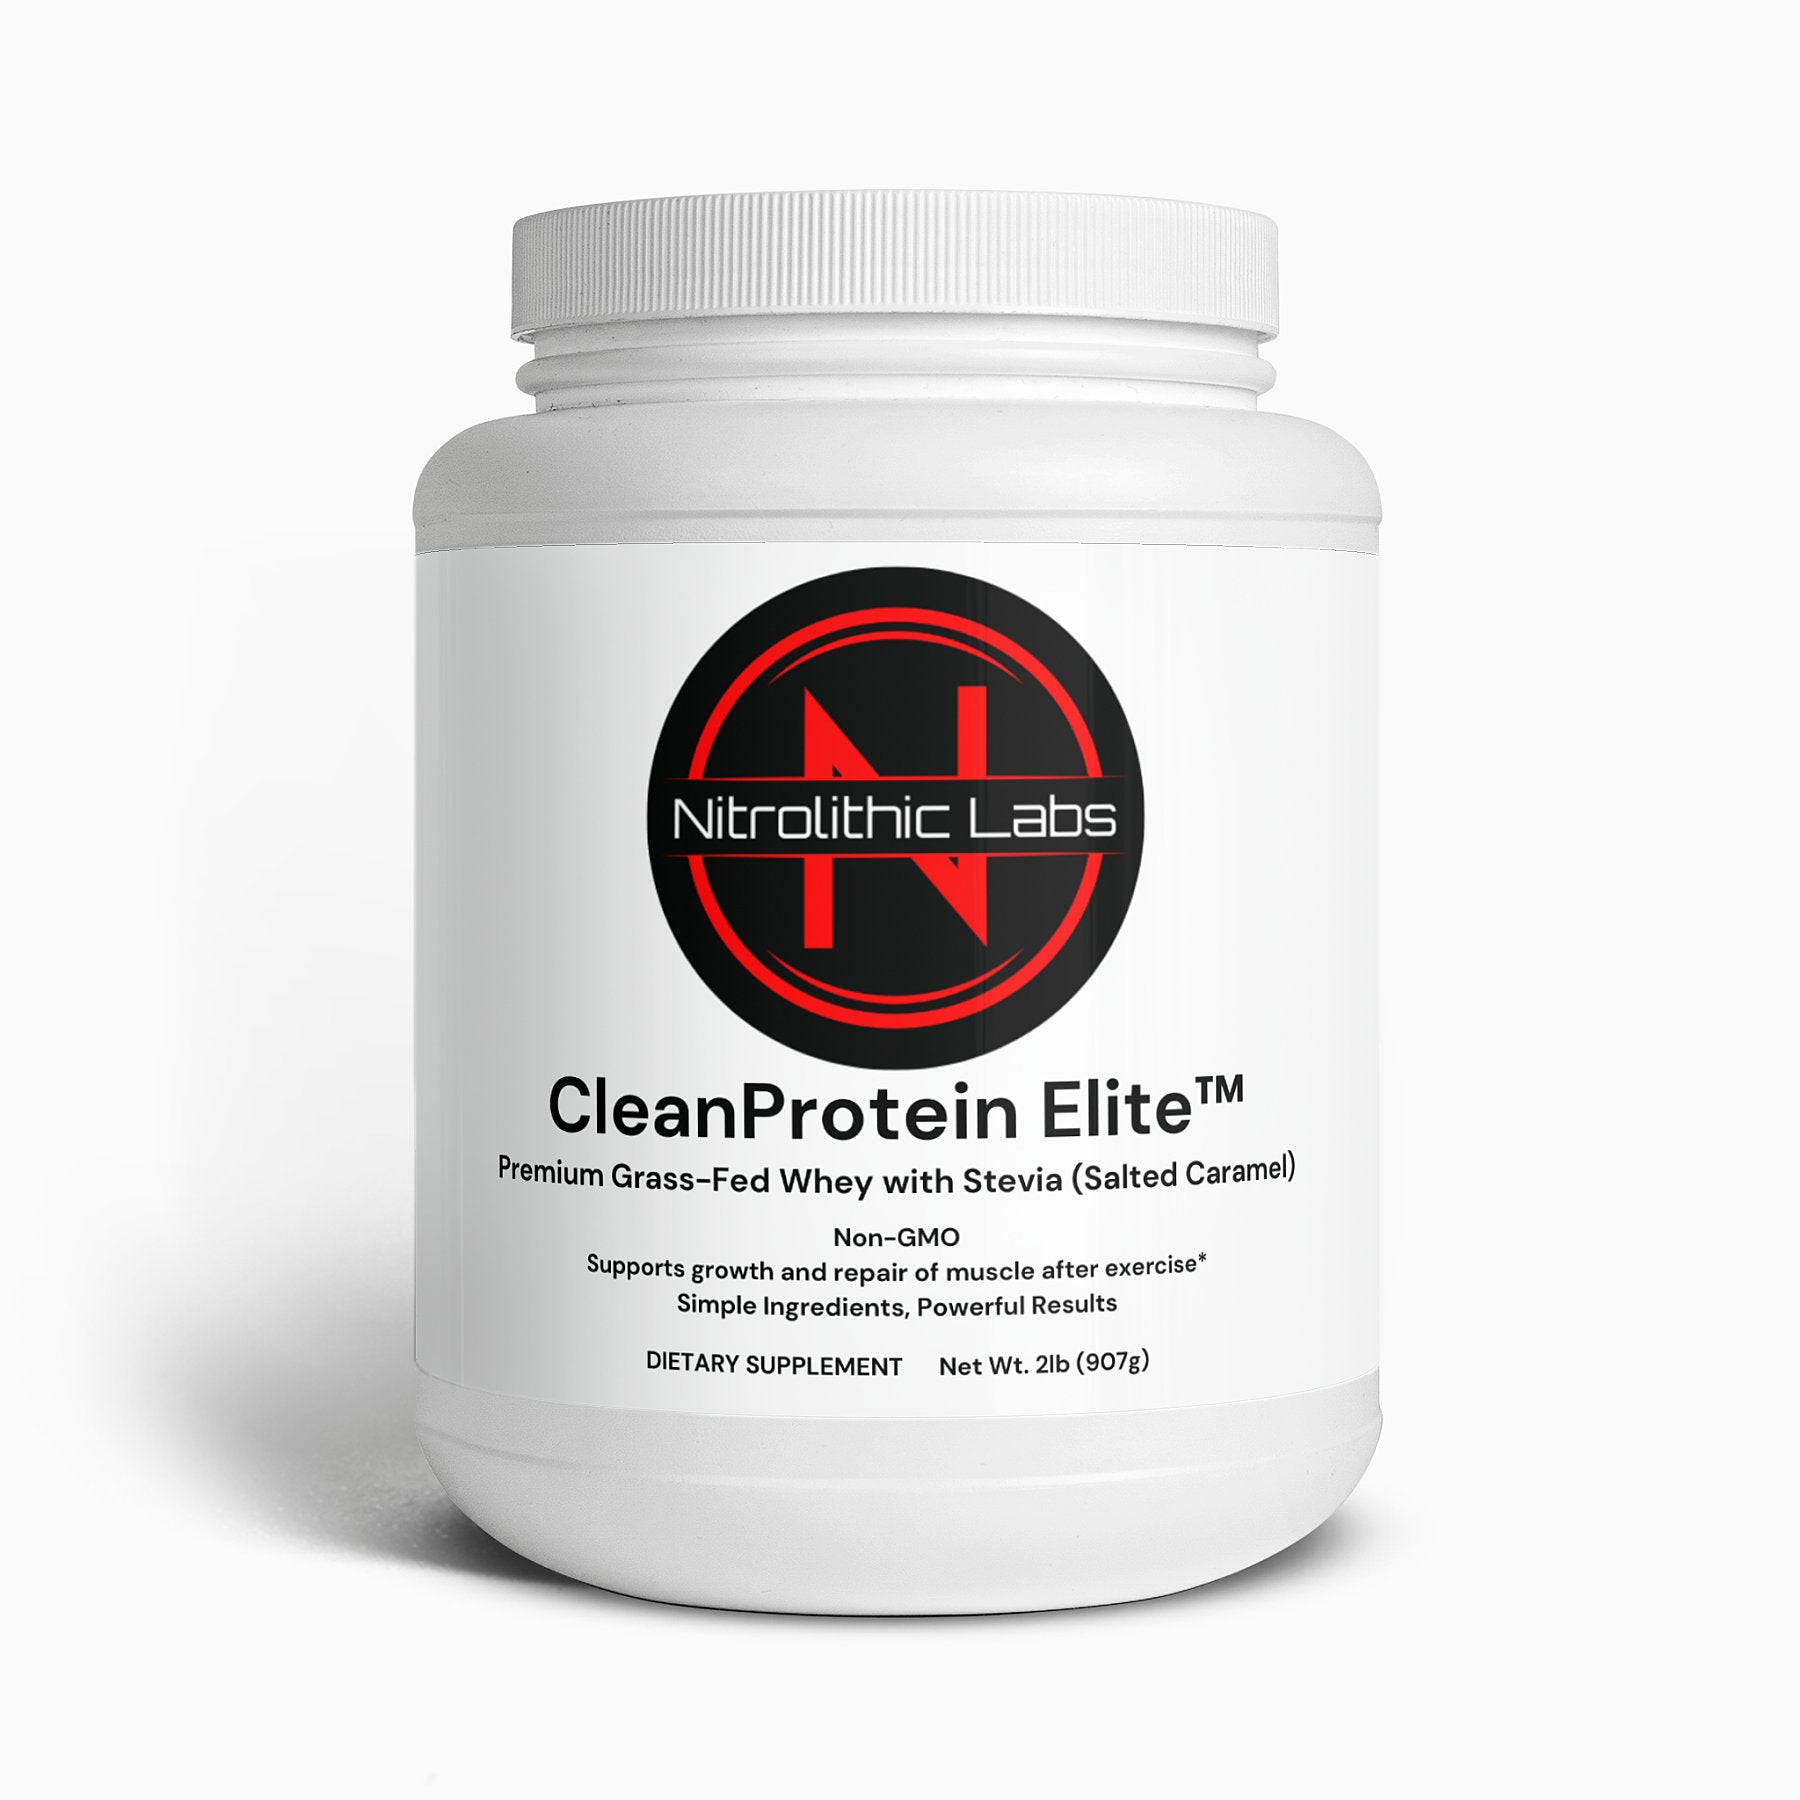 Clean Protein Elite™: Premium Grass-Fed Whey with Stevia (Salted